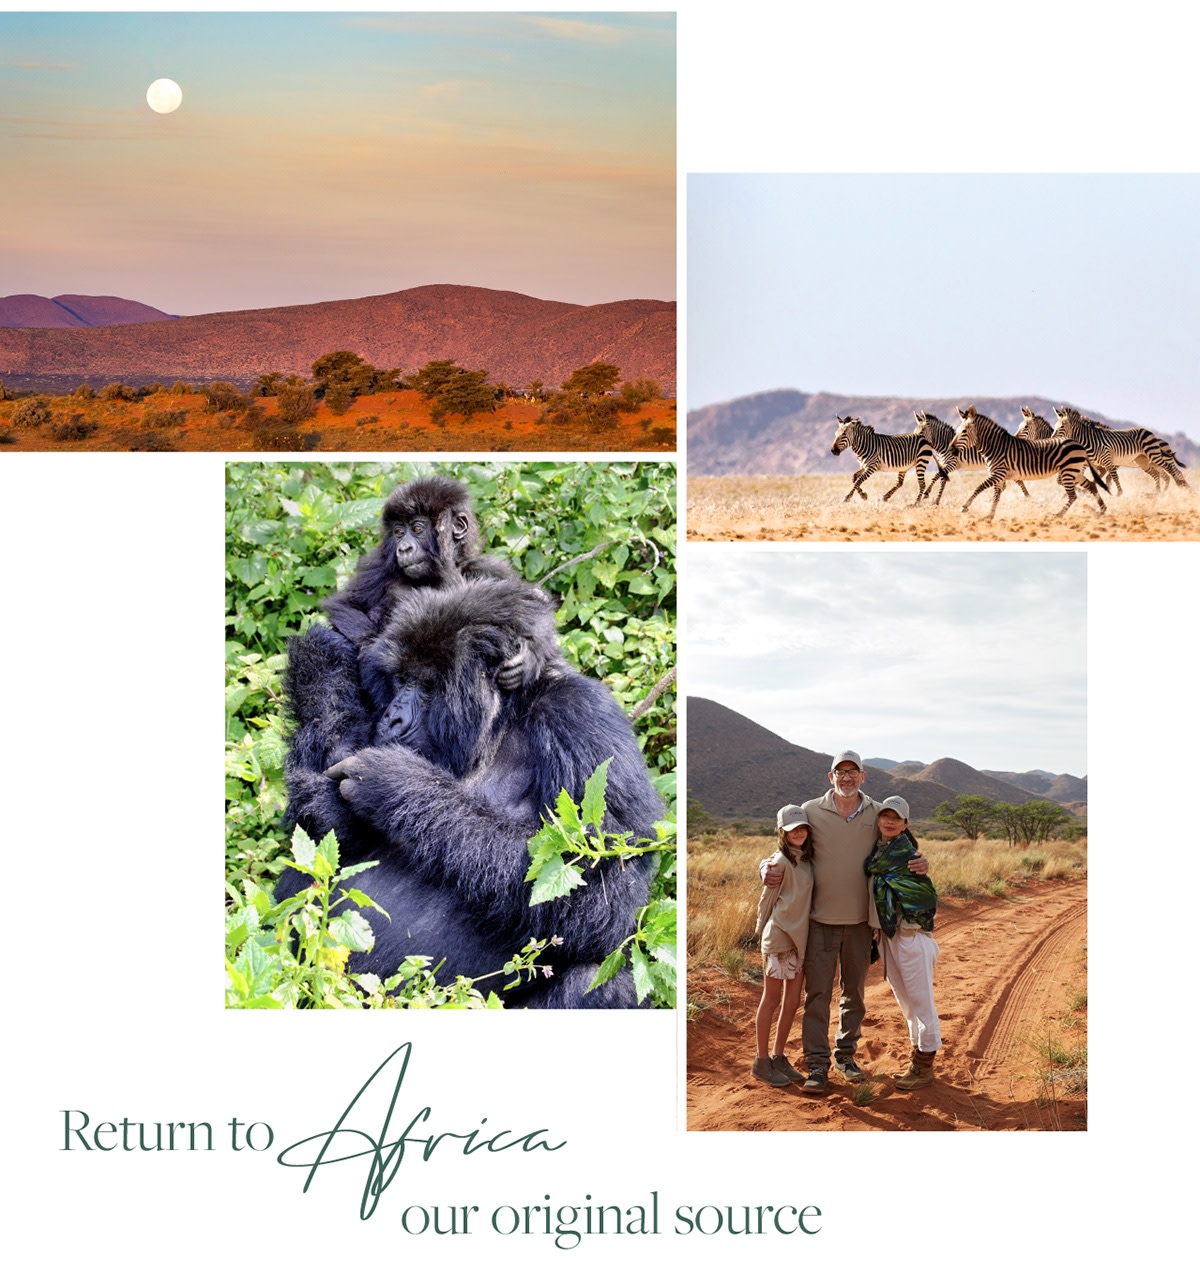 Returning to Africa, our original source